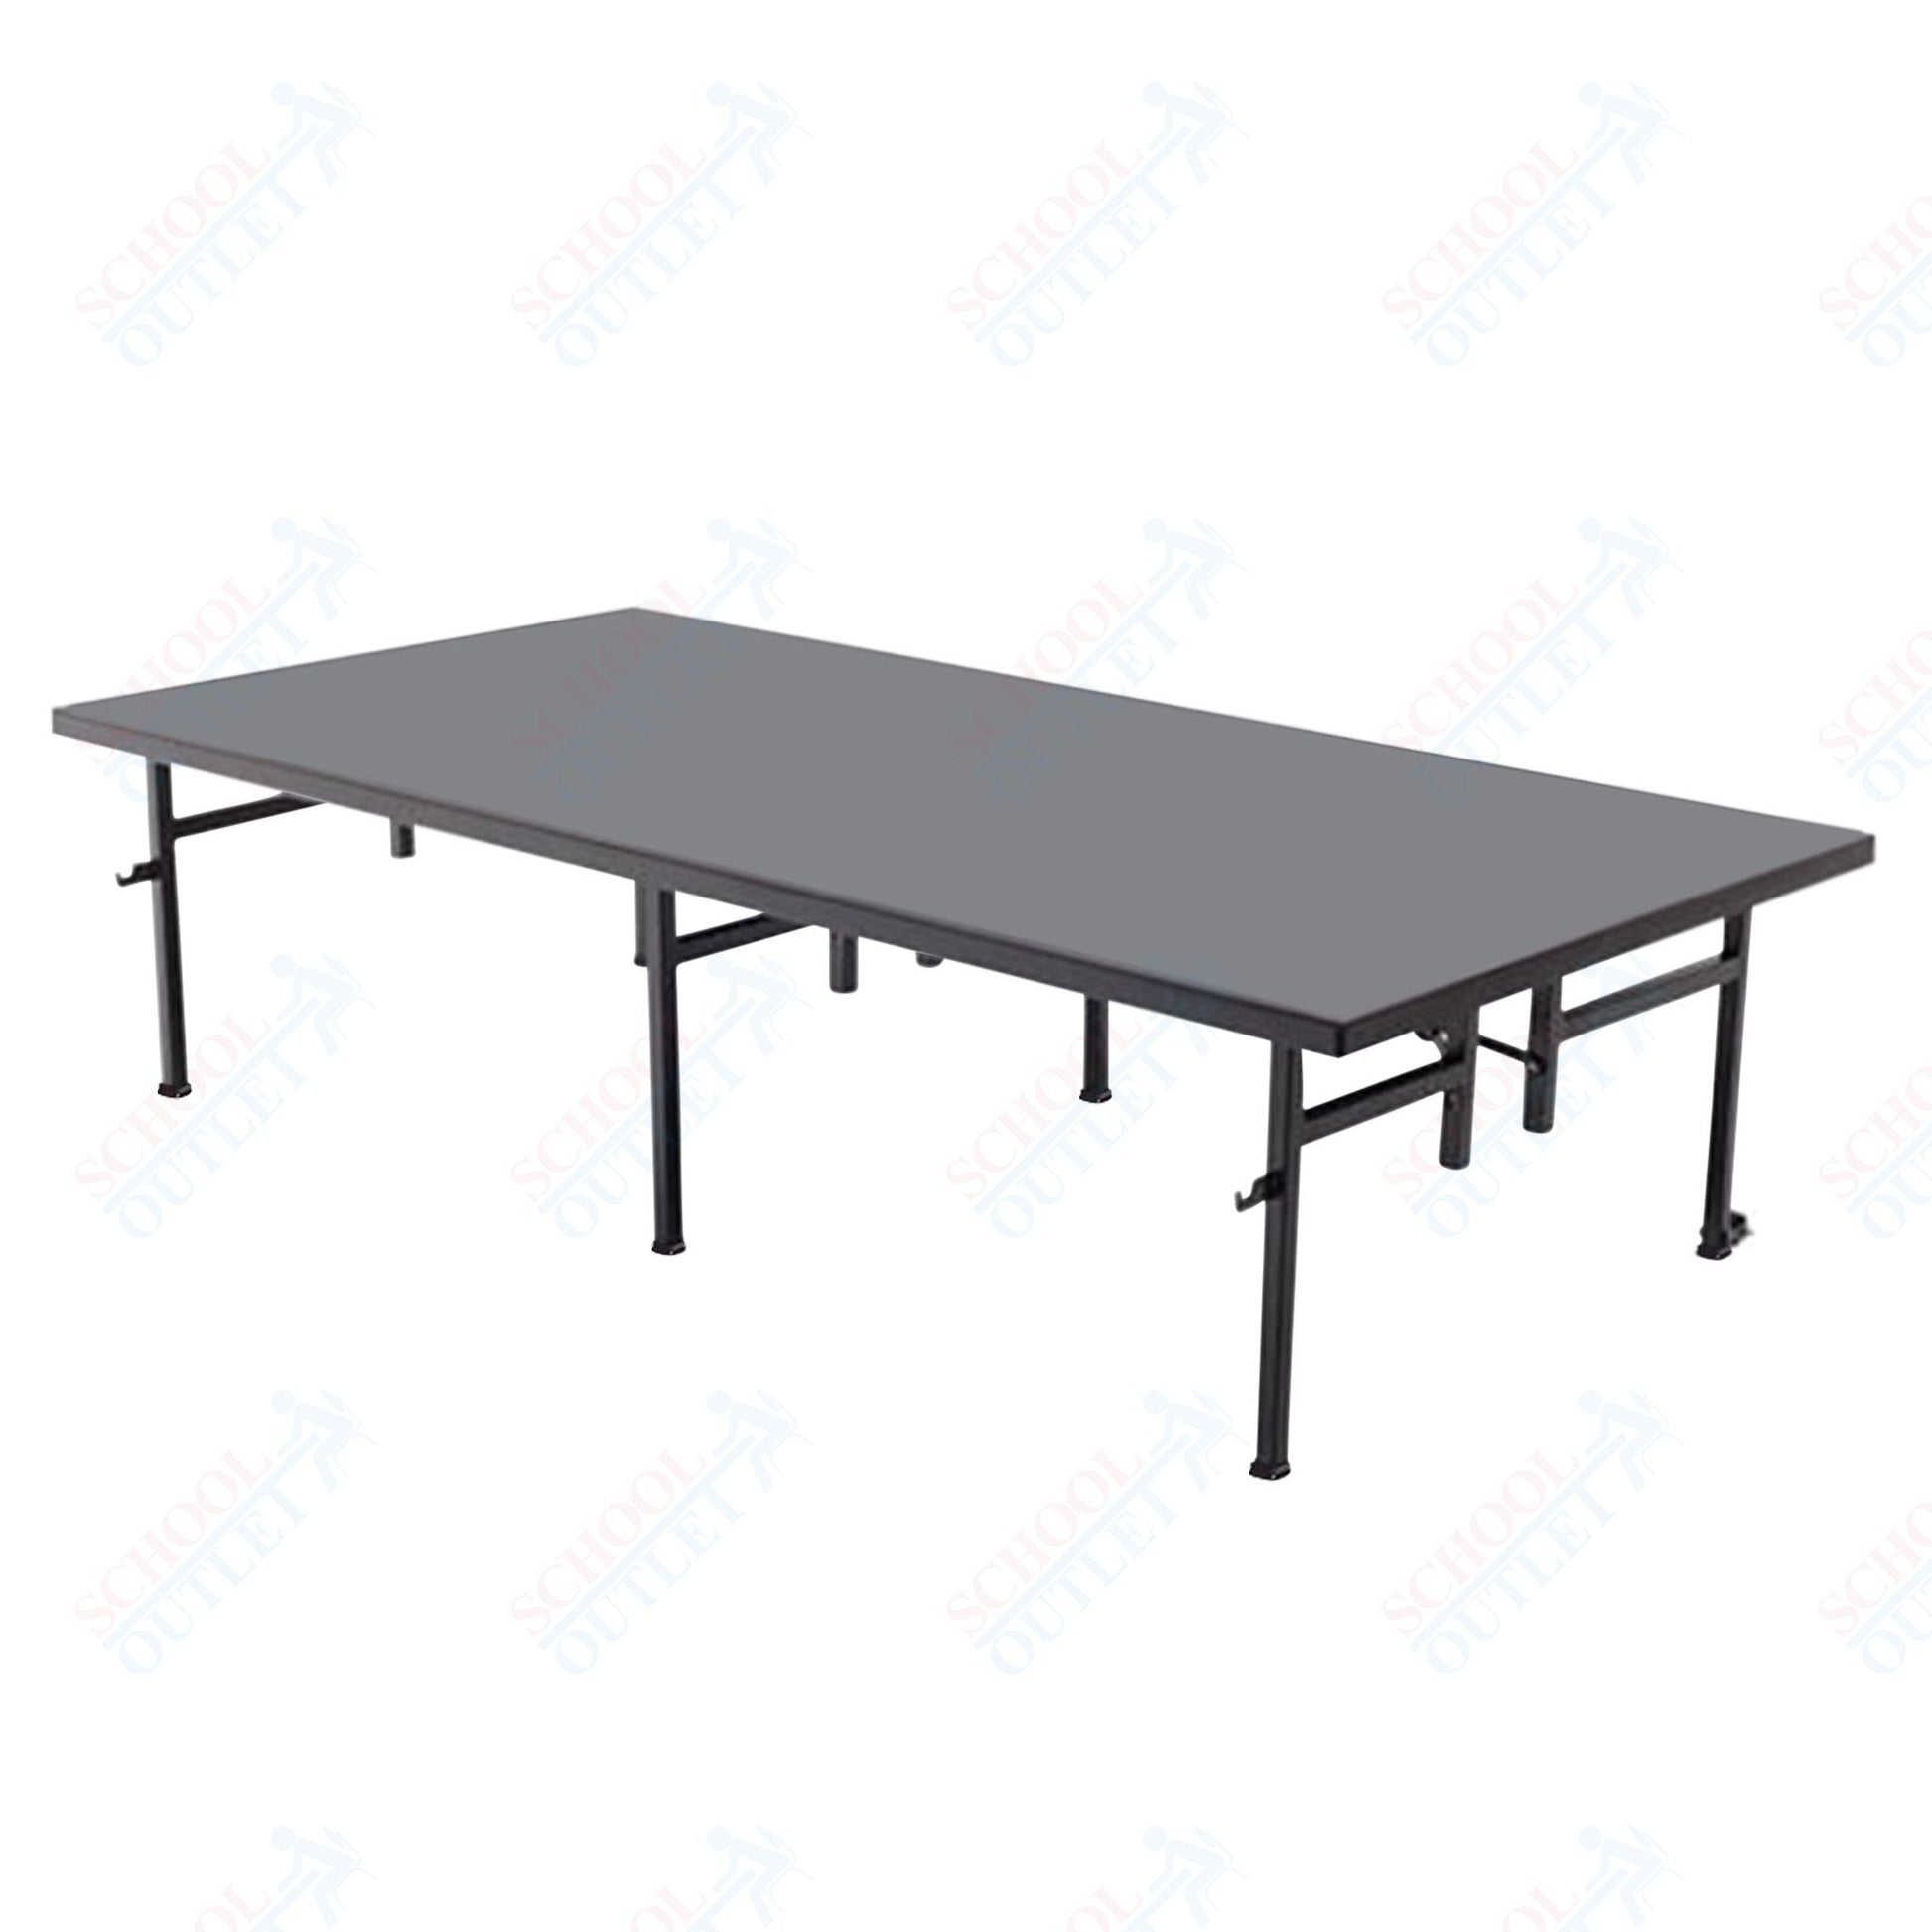 AmTab Fixed Height Stage - Polypropylene Top - 36"W x 96"L x 8"H (AmTab AMT - ST3808P) - SchoolOutlet